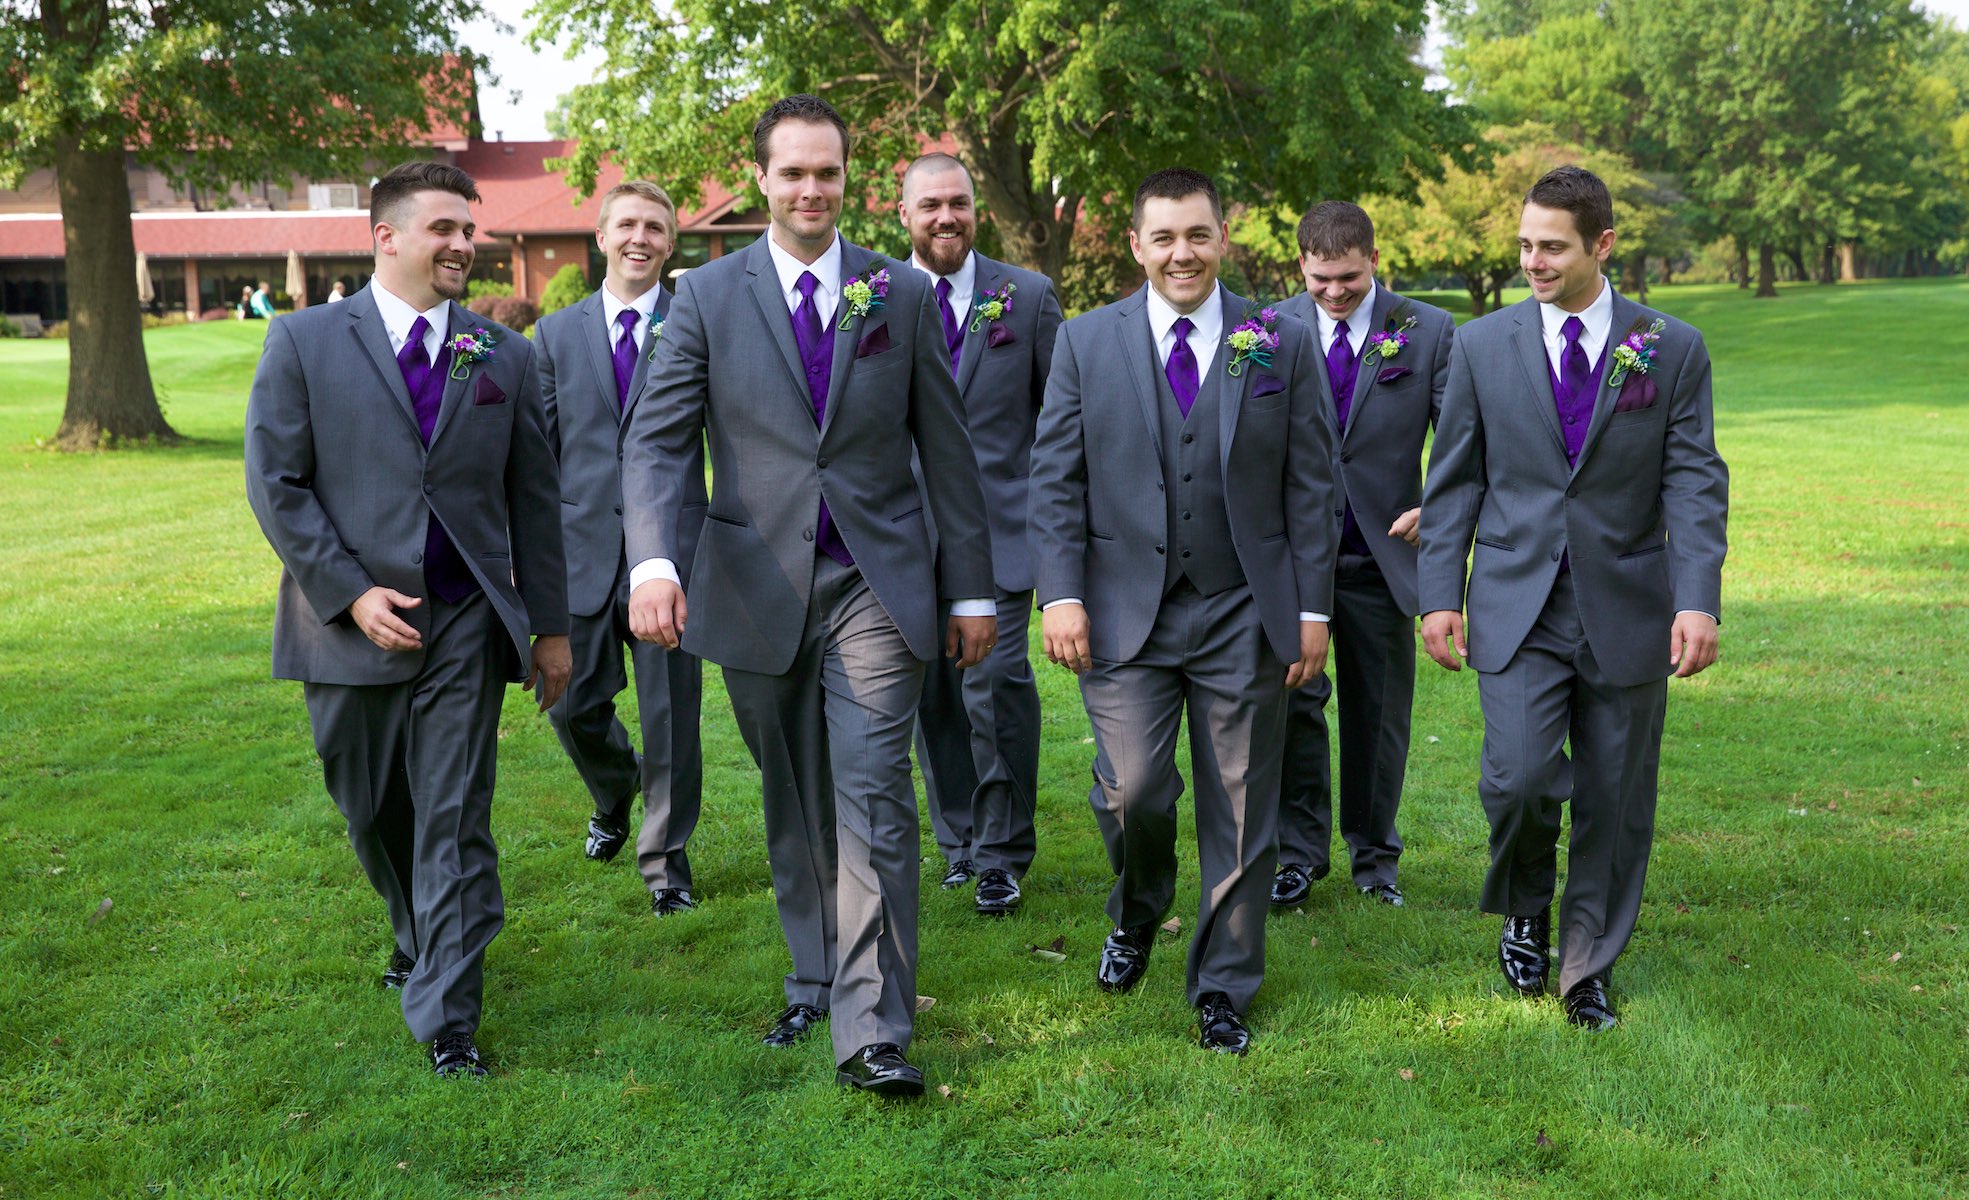 Nick walks with his groomsmen and ushers to the outdoor wedding ceremony site at the Jacksonville Country Club. Sometimes when the groomsmen want to do a cool group photo we have them walk Reservoir Dogs-esque, but this crew did this all naturally. Wedding photography by Steve & Tiffany Warmowski.